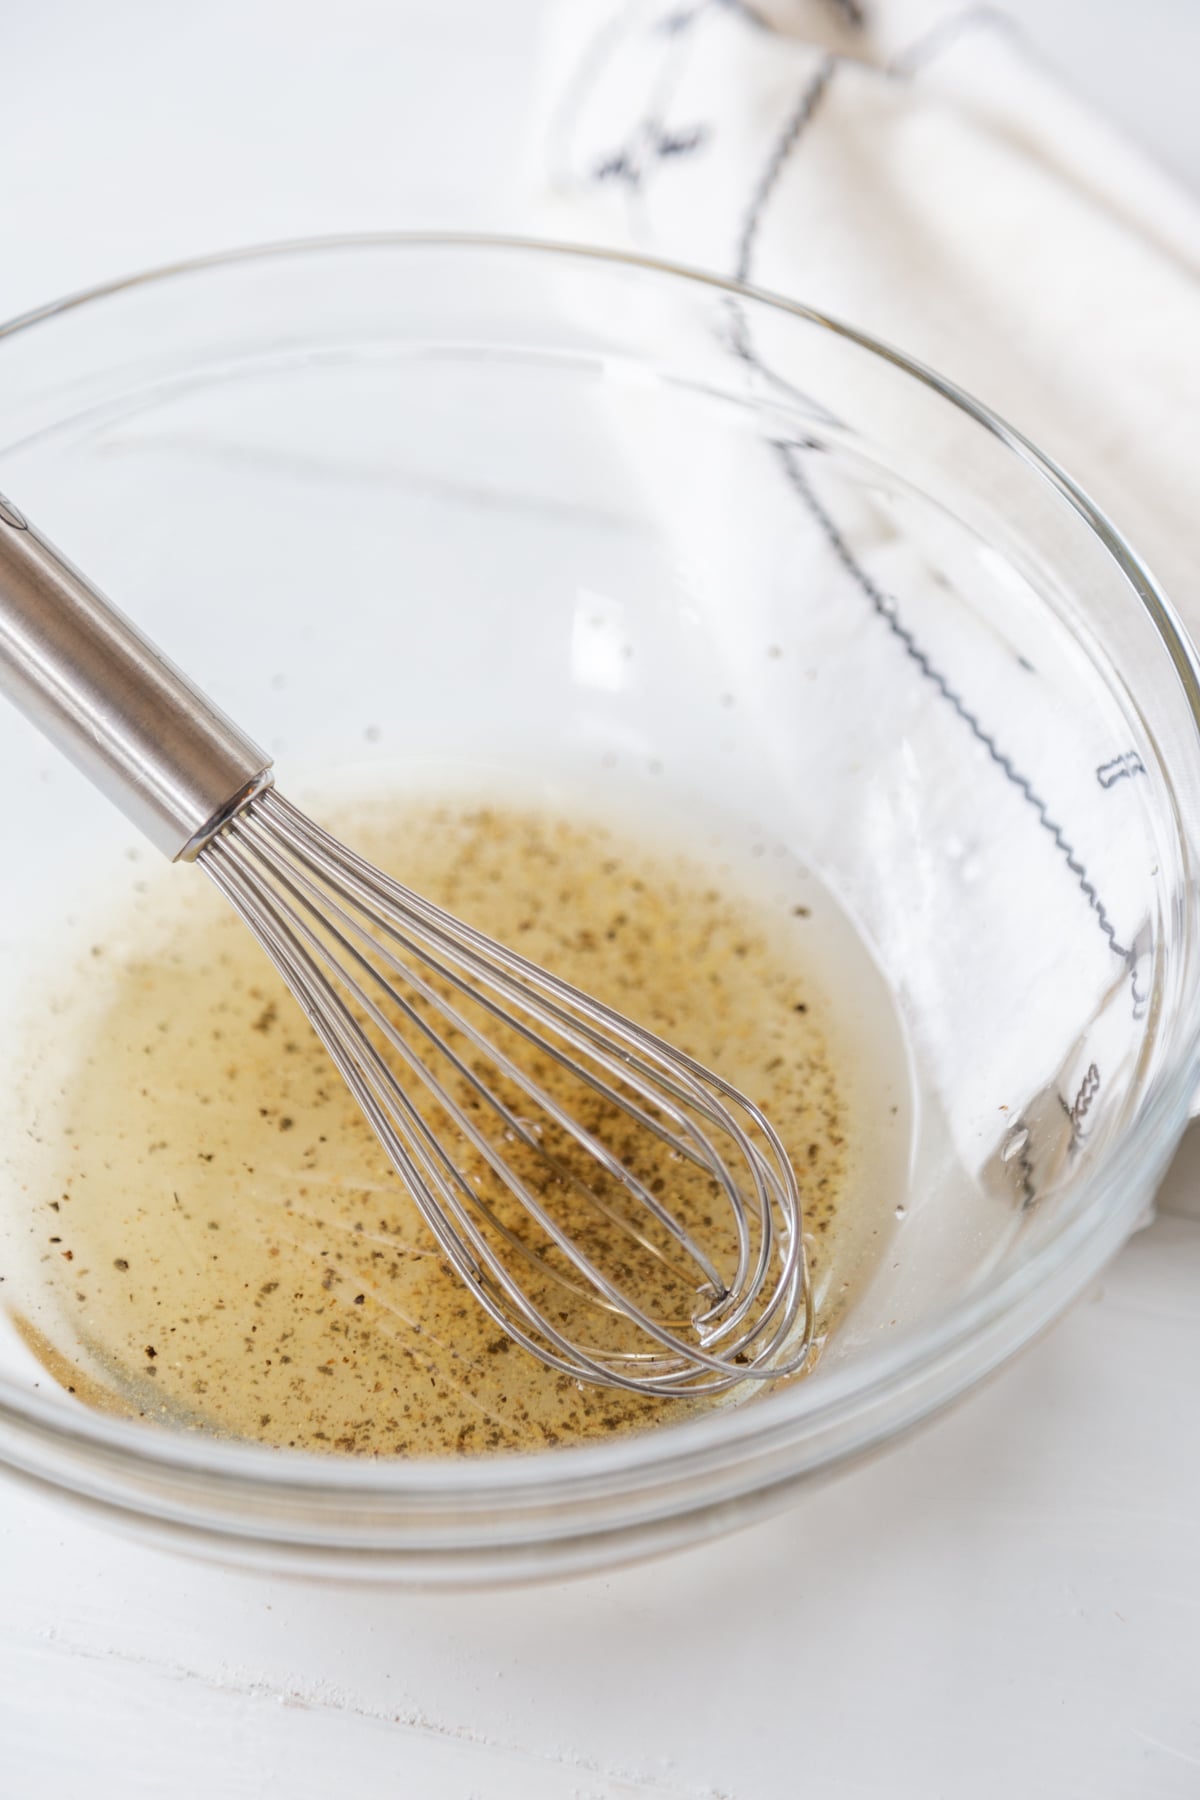 A clear glass bowl with a vinegar salad dressing being whisked with a silver whisk.